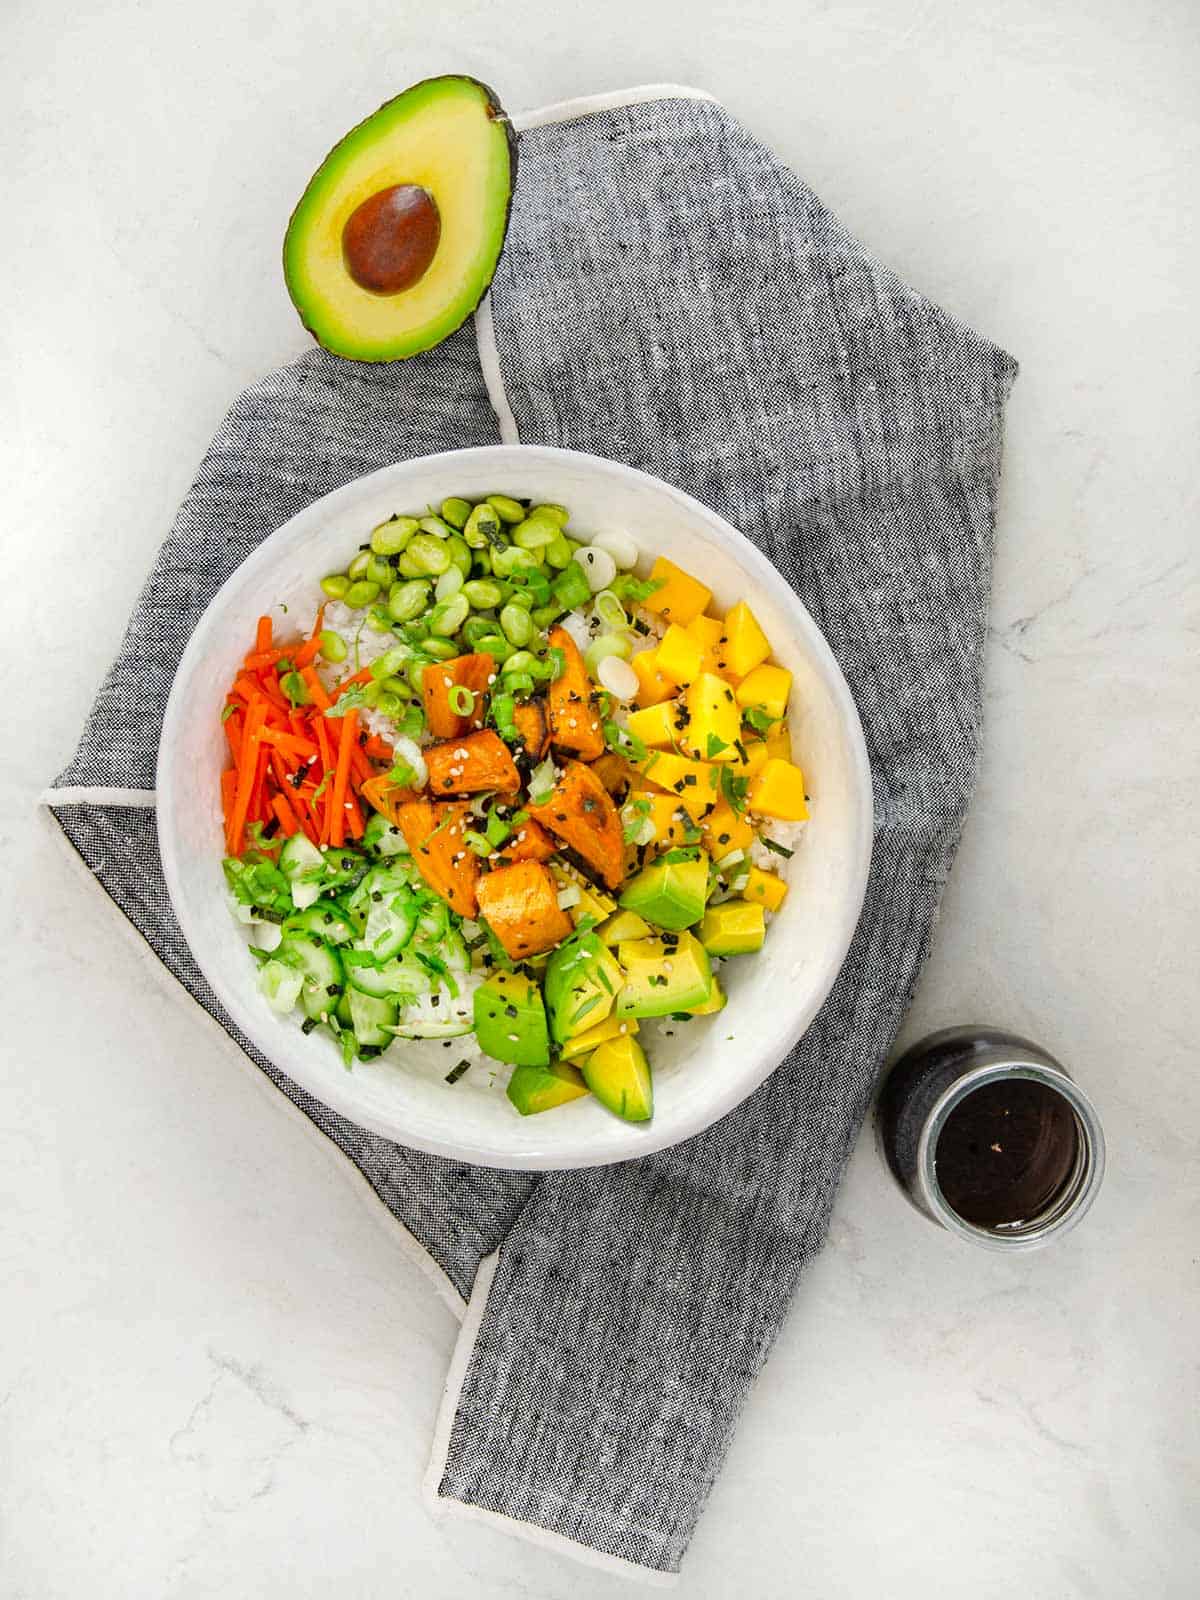 Sushi salad bowl with carrots, avocado, sweet potatoes and edamame topped with furikake.